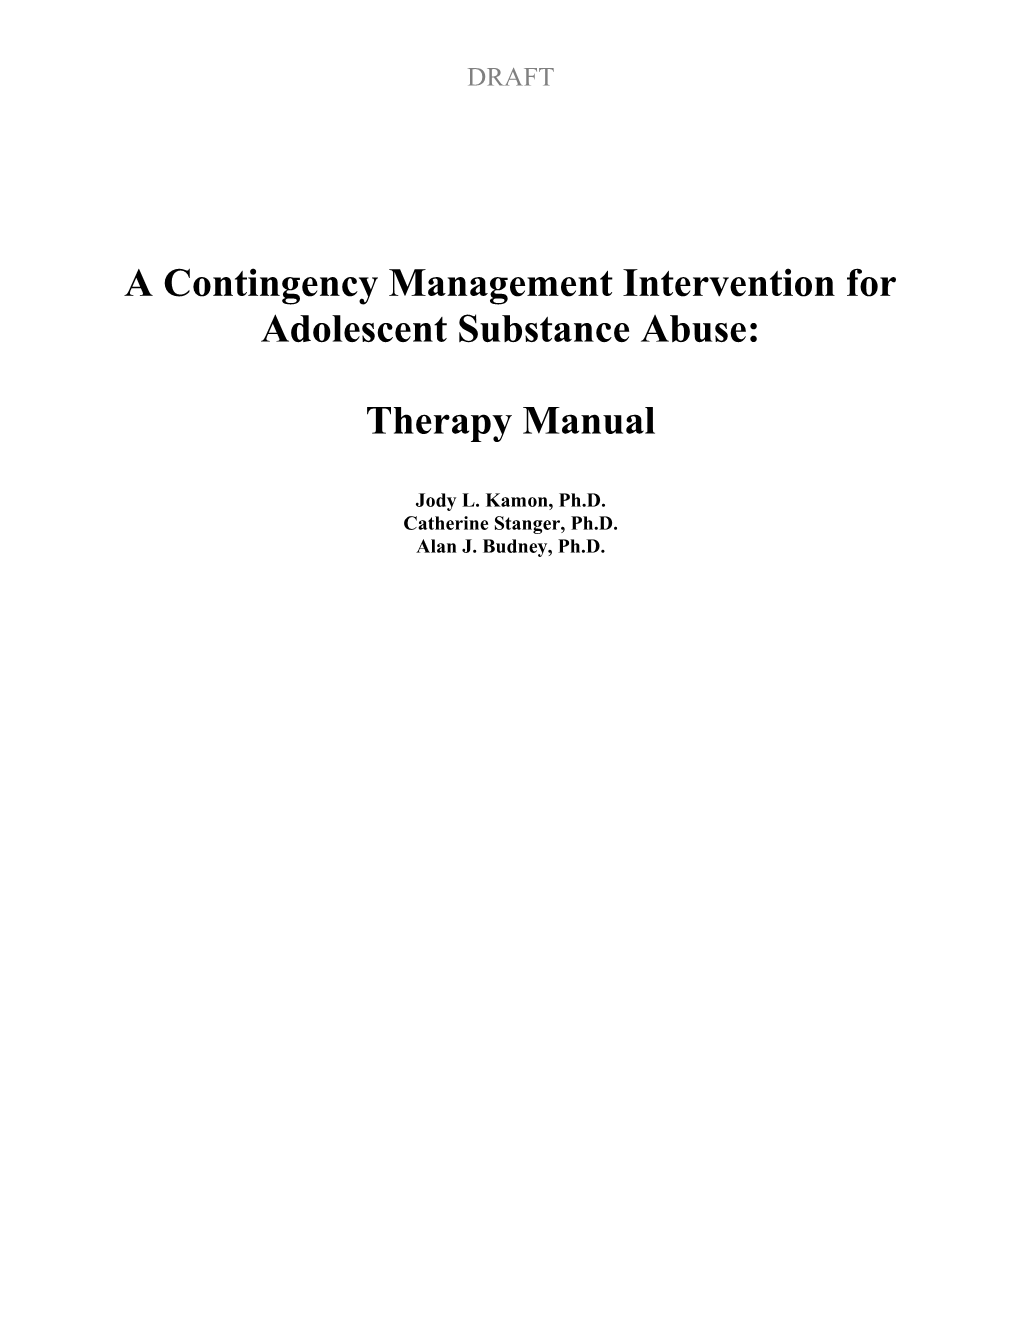 A Contingency Management Intervention for Adolescent Substance Abuse